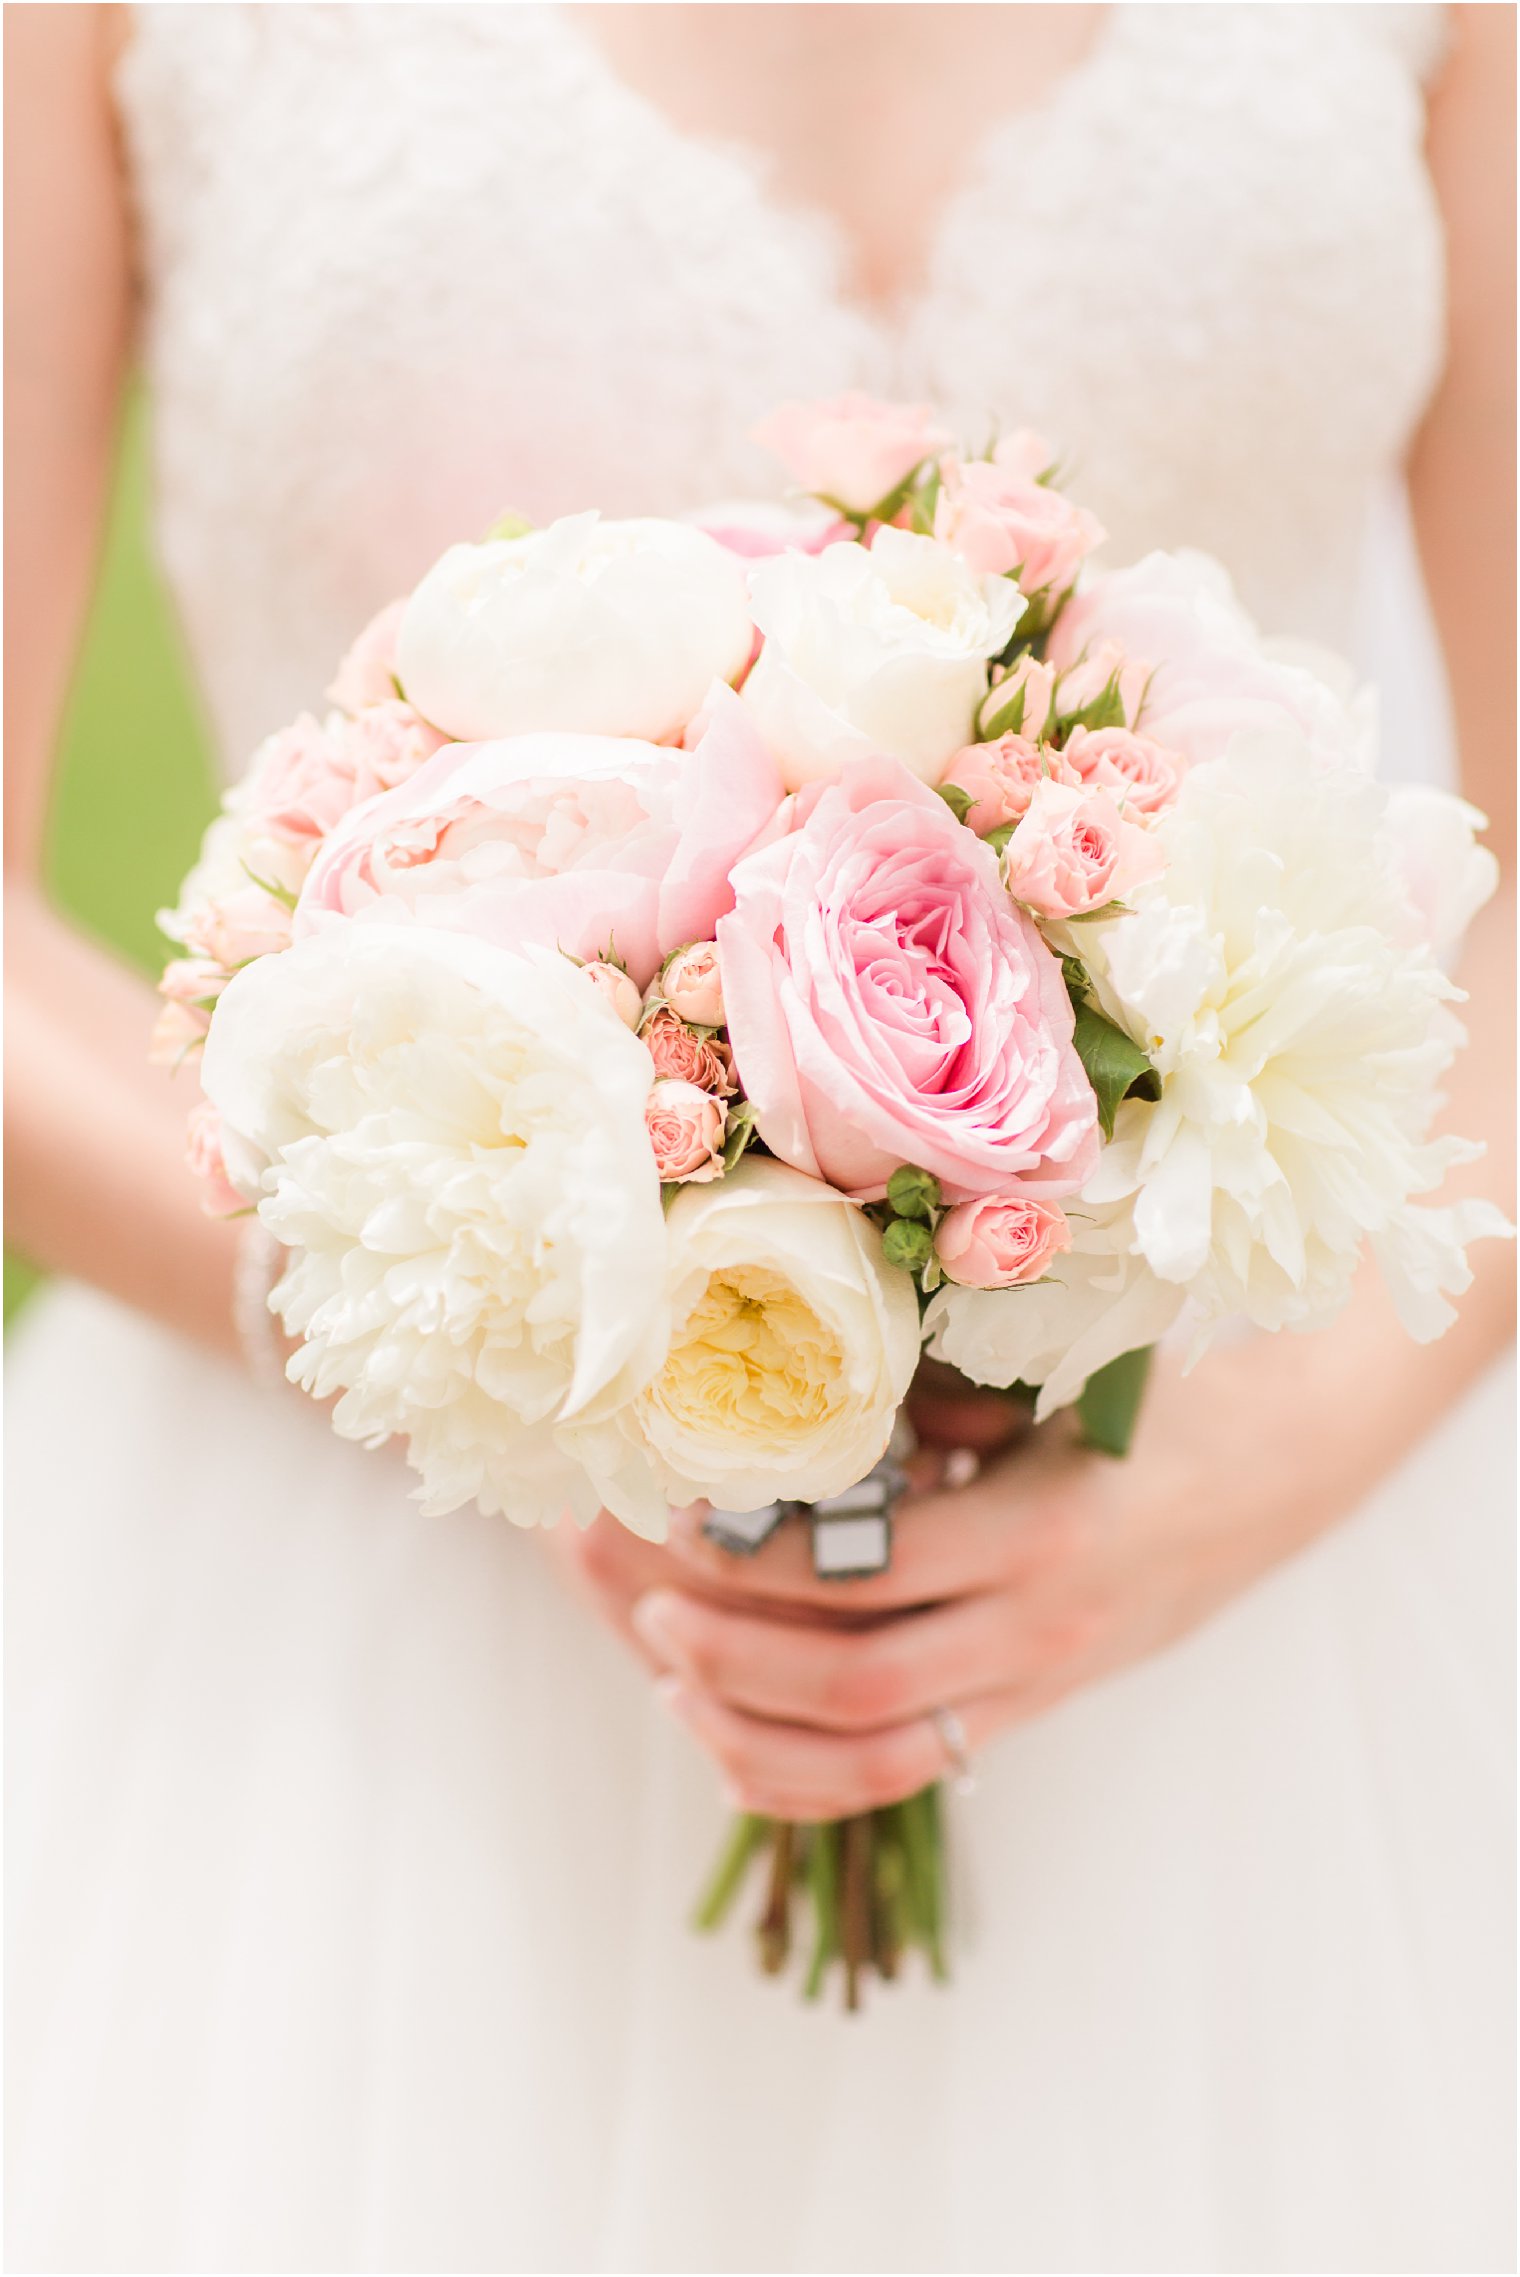 Bouquet with peonies and hydrangeas